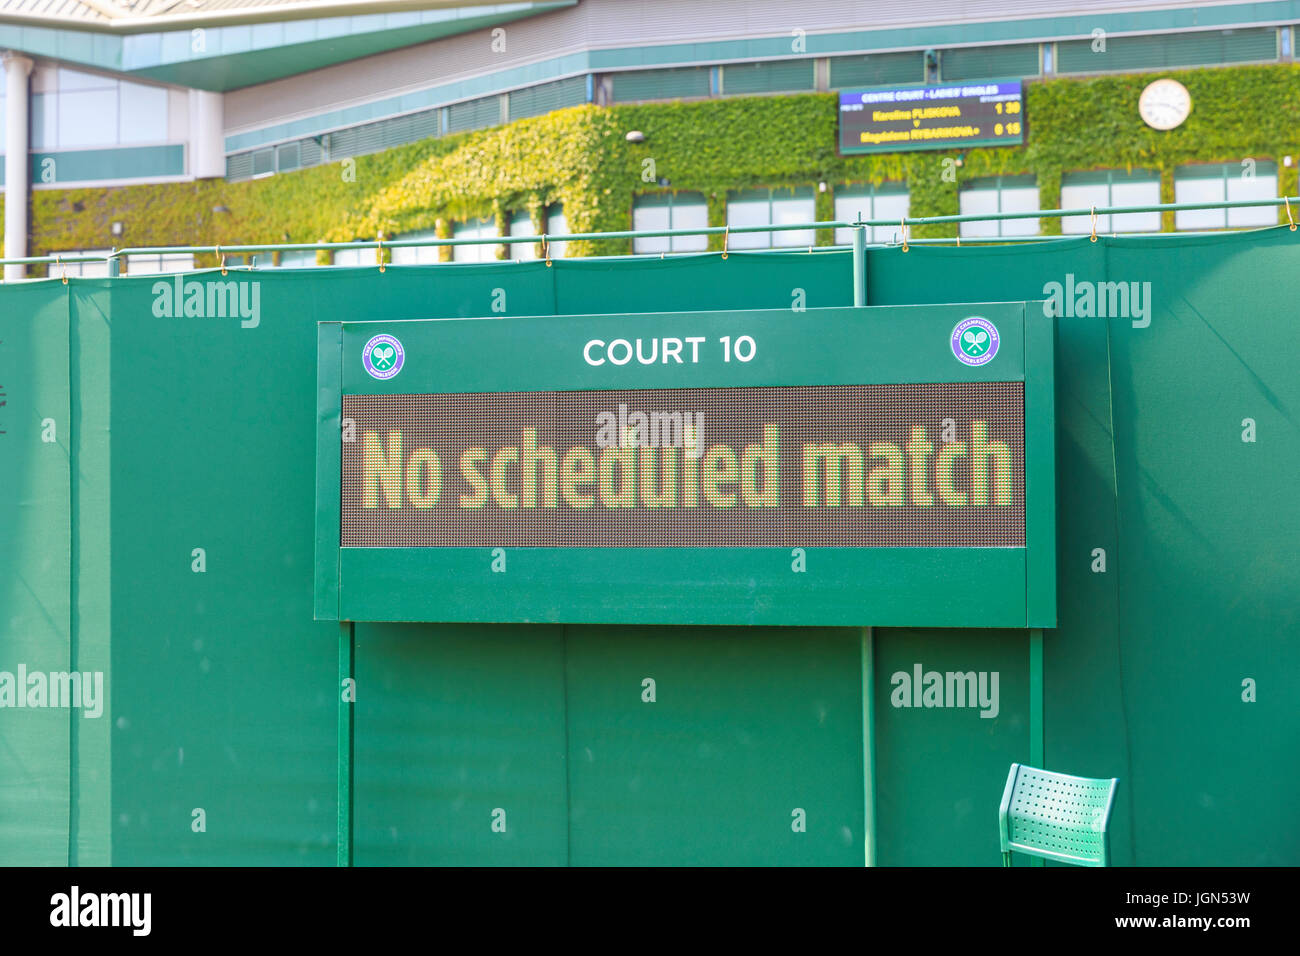 'No Scheduled Match' sign on a court at the Wimbledon Tennis Championships 2017, All England Lawn Tennis and Croquet Club, UK Stock Photo